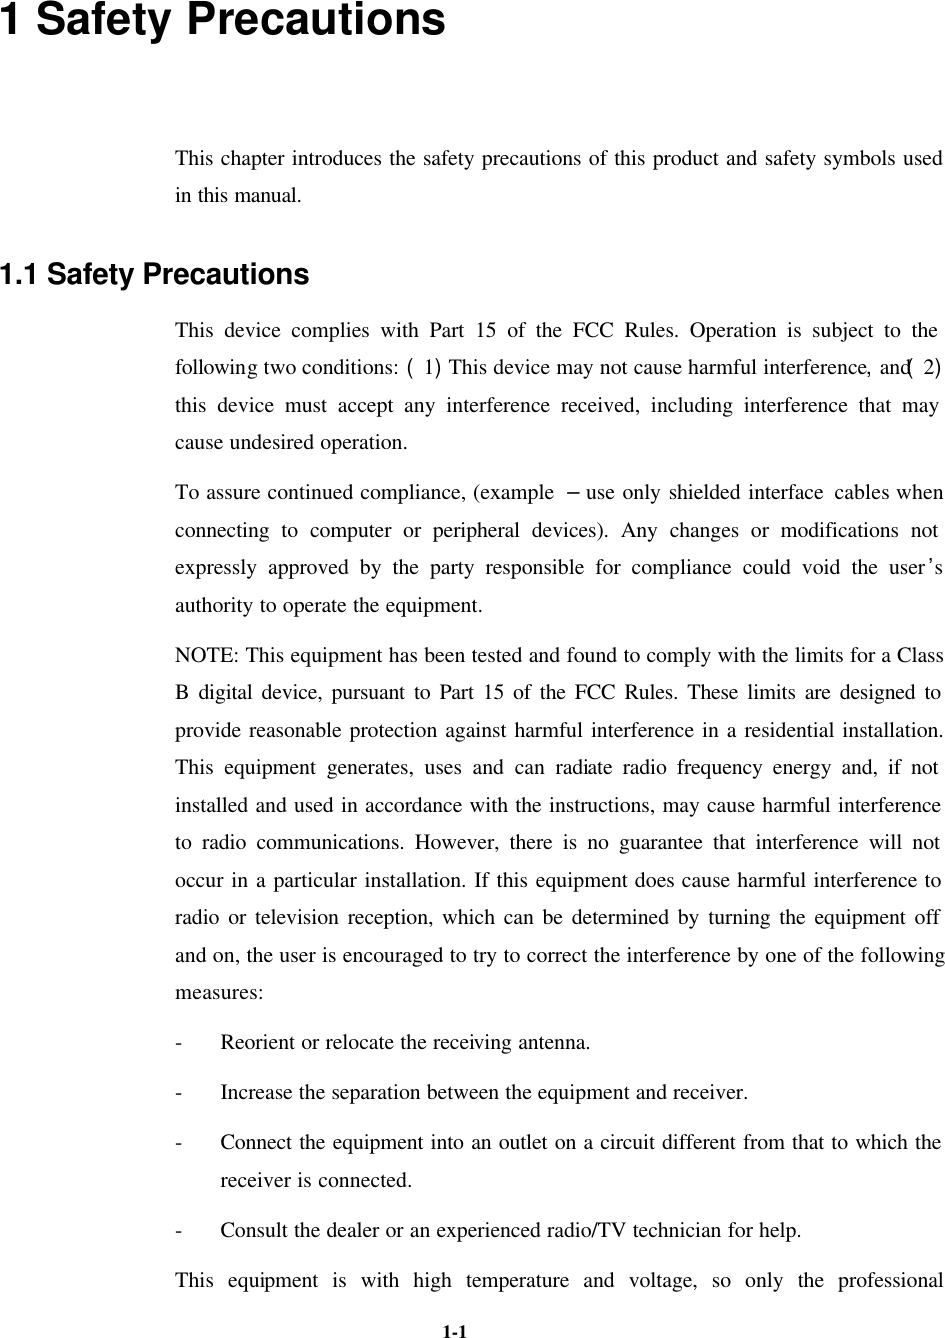   1-1 1 Safety Precautions This chapter introduces the safety precautions of this product and safety symbols used in this manual. 1.1 Safety Precautions This device complies with Part 15 of the FCC Rules. Operation is subject to the following two conditions: (1)This device may not cause harmful interference,and(2) this device must accept any interference received, including interference that may cause undesired operation. To assure continued compliance, (example  – use only shielded interface cables when connecting to computer or peripheral devices). Any changes or modifications not expressly approved by the party responsible for compliance could void the user’s authority to operate the equipment. NOTE: This equipment has been tested and found to comply with the limits for a Class B digital device, pursuant to Part 15 of the FCC Rules. These limits are designed to provide reasonable protection against harmful interference in a residential installation. This equipment generates, uses and can radiate radio frequency energy and, if not installed and used in accordance with the instructions, may cause harmful interference to radio communications. However, there is no guarantee that interference will not occur in a particular installation. If this equipment does cause harmful interference to radio or television reception, which can be determined by turning the equipment off and on, the user is encouraged to try to correct the interference by one of the following measures: - Reorient or relocate the receiving antenna. - Increase the separation between the equipment and receiver. - Connect the equipment into an outlet on a circuit different from that to which the receiver is connected. - Consult the dealer or an experienced radio/TV technician for help. This equipment is with high temperature and voltage, so only the professional 